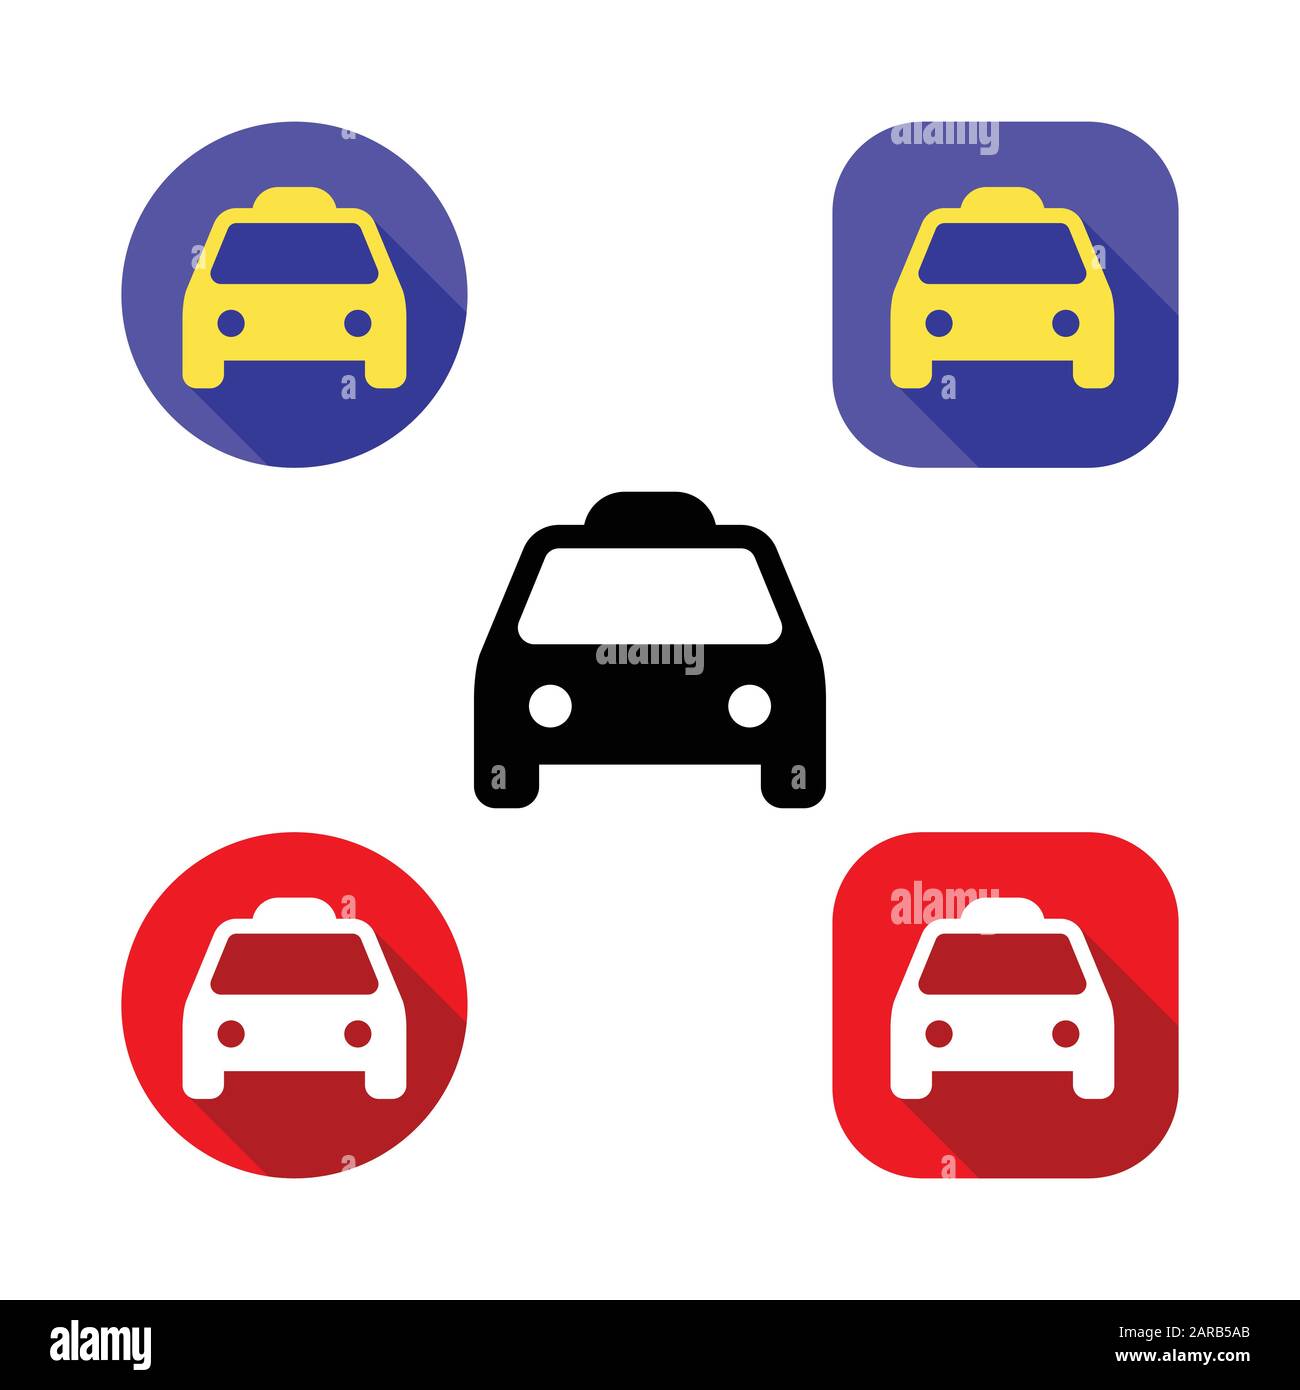 Taxi car sign icon. Public transport symbol, taxi icon in trendy flat design Stock Vector